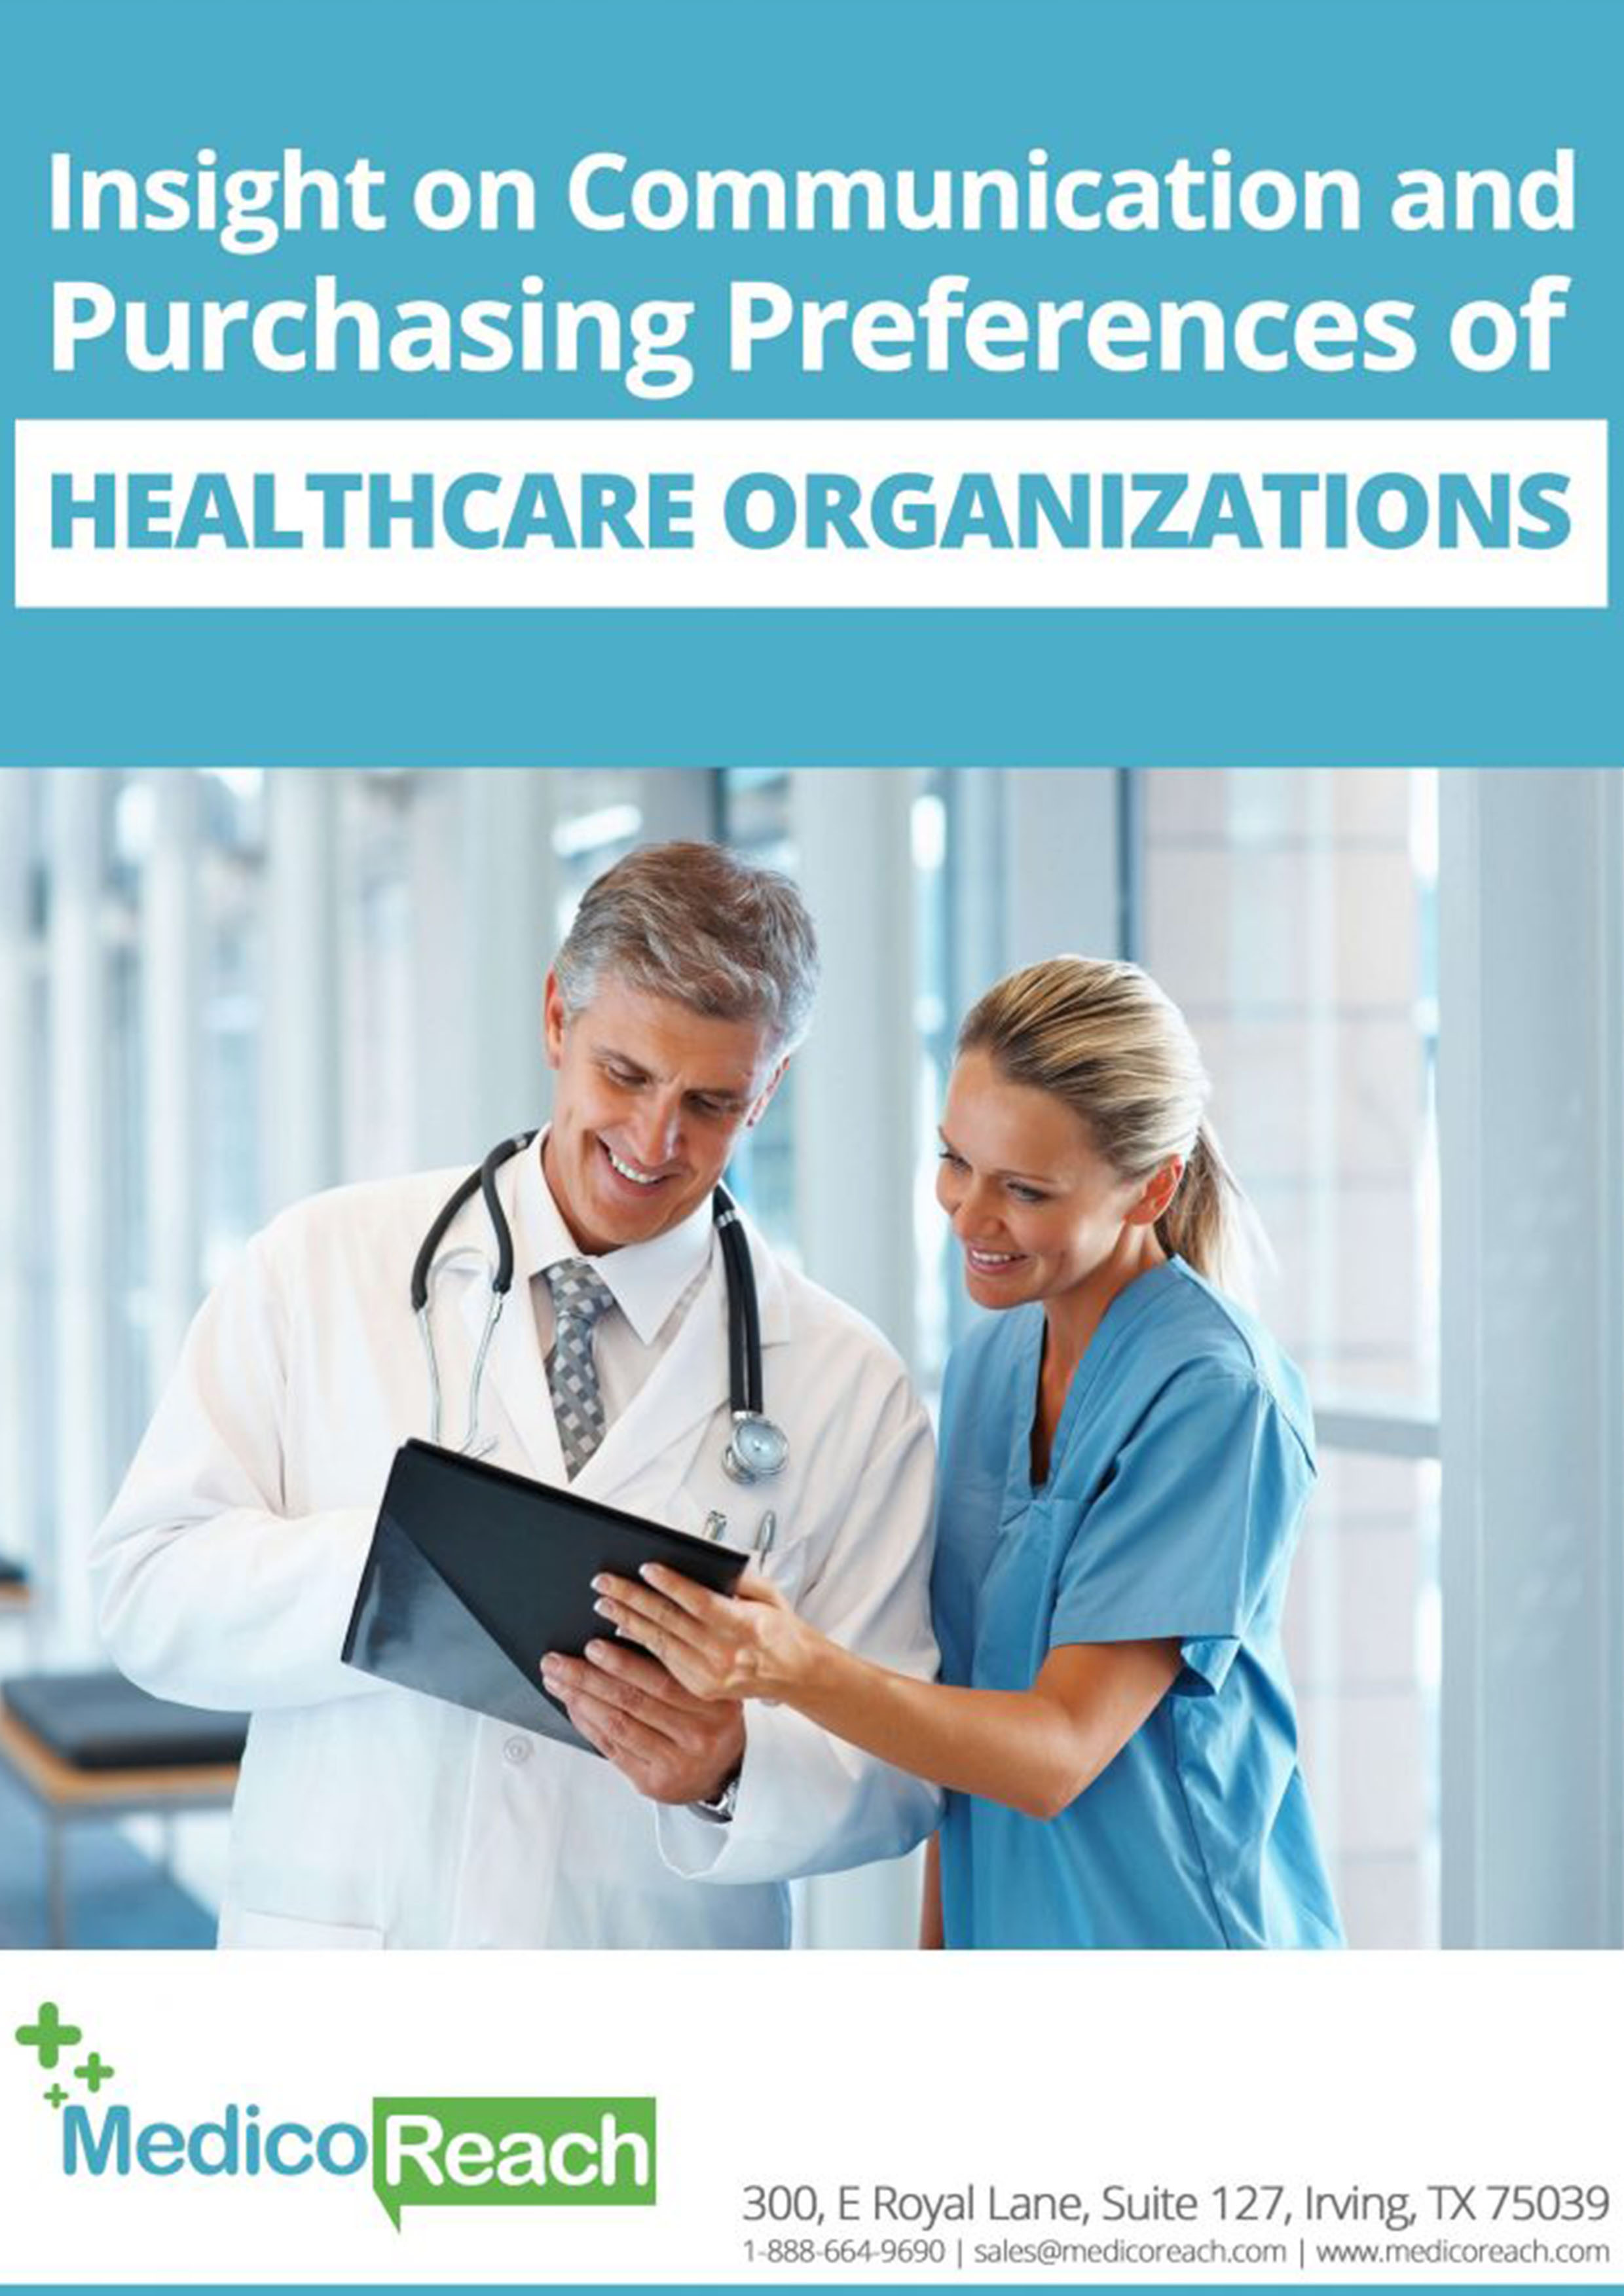 Insight on communication and purchasing preferences of healthcare organizations